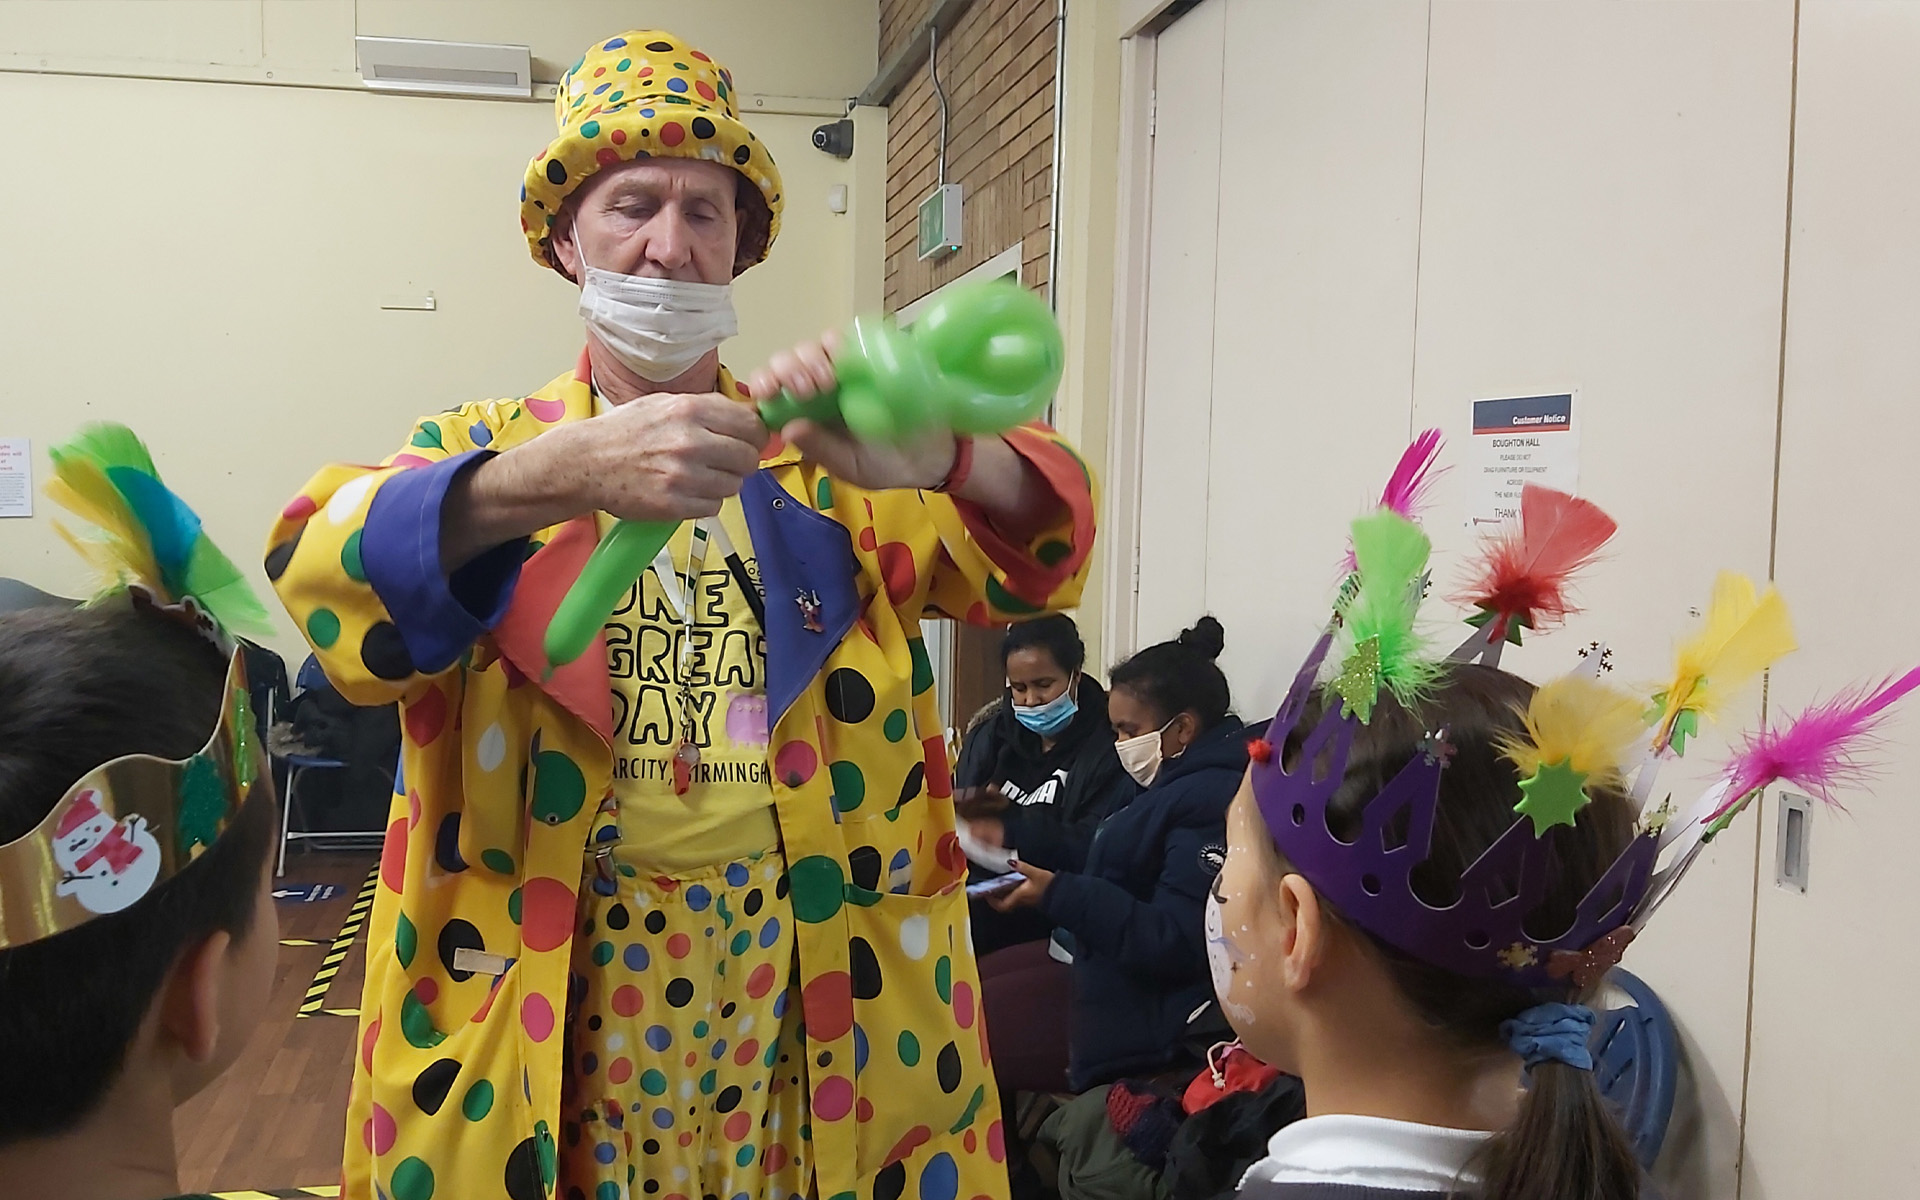 A clown creating balloon animals for children at a Christmas party.